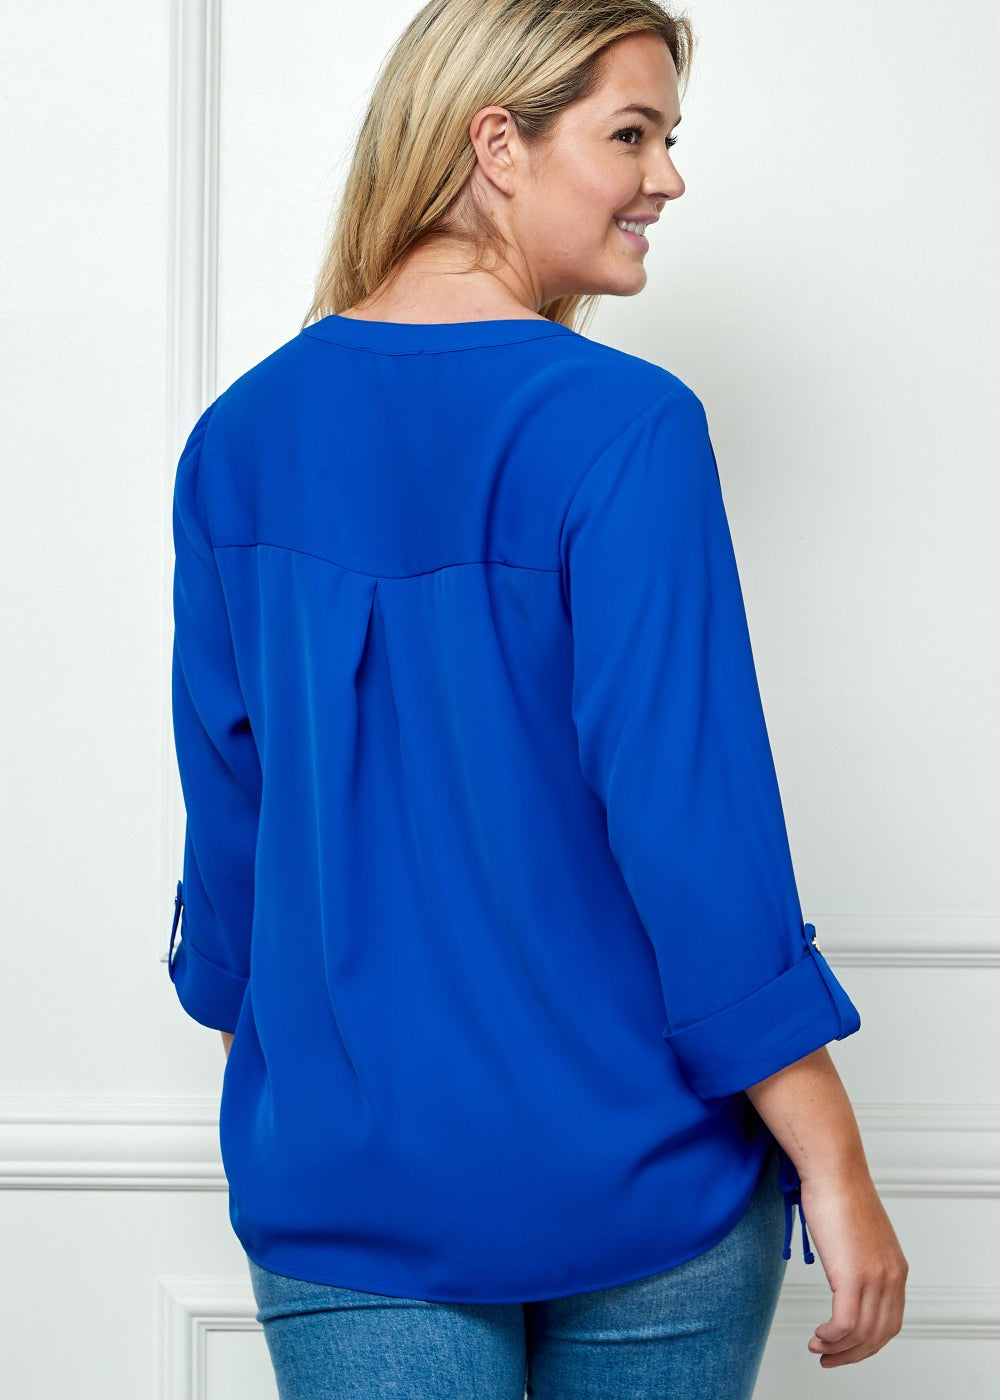 Sara Michelle 3/4 Button Tab Sleeve Patch Pockets Side Ties Popover - PLUS - DressbarnShirts & Blouses